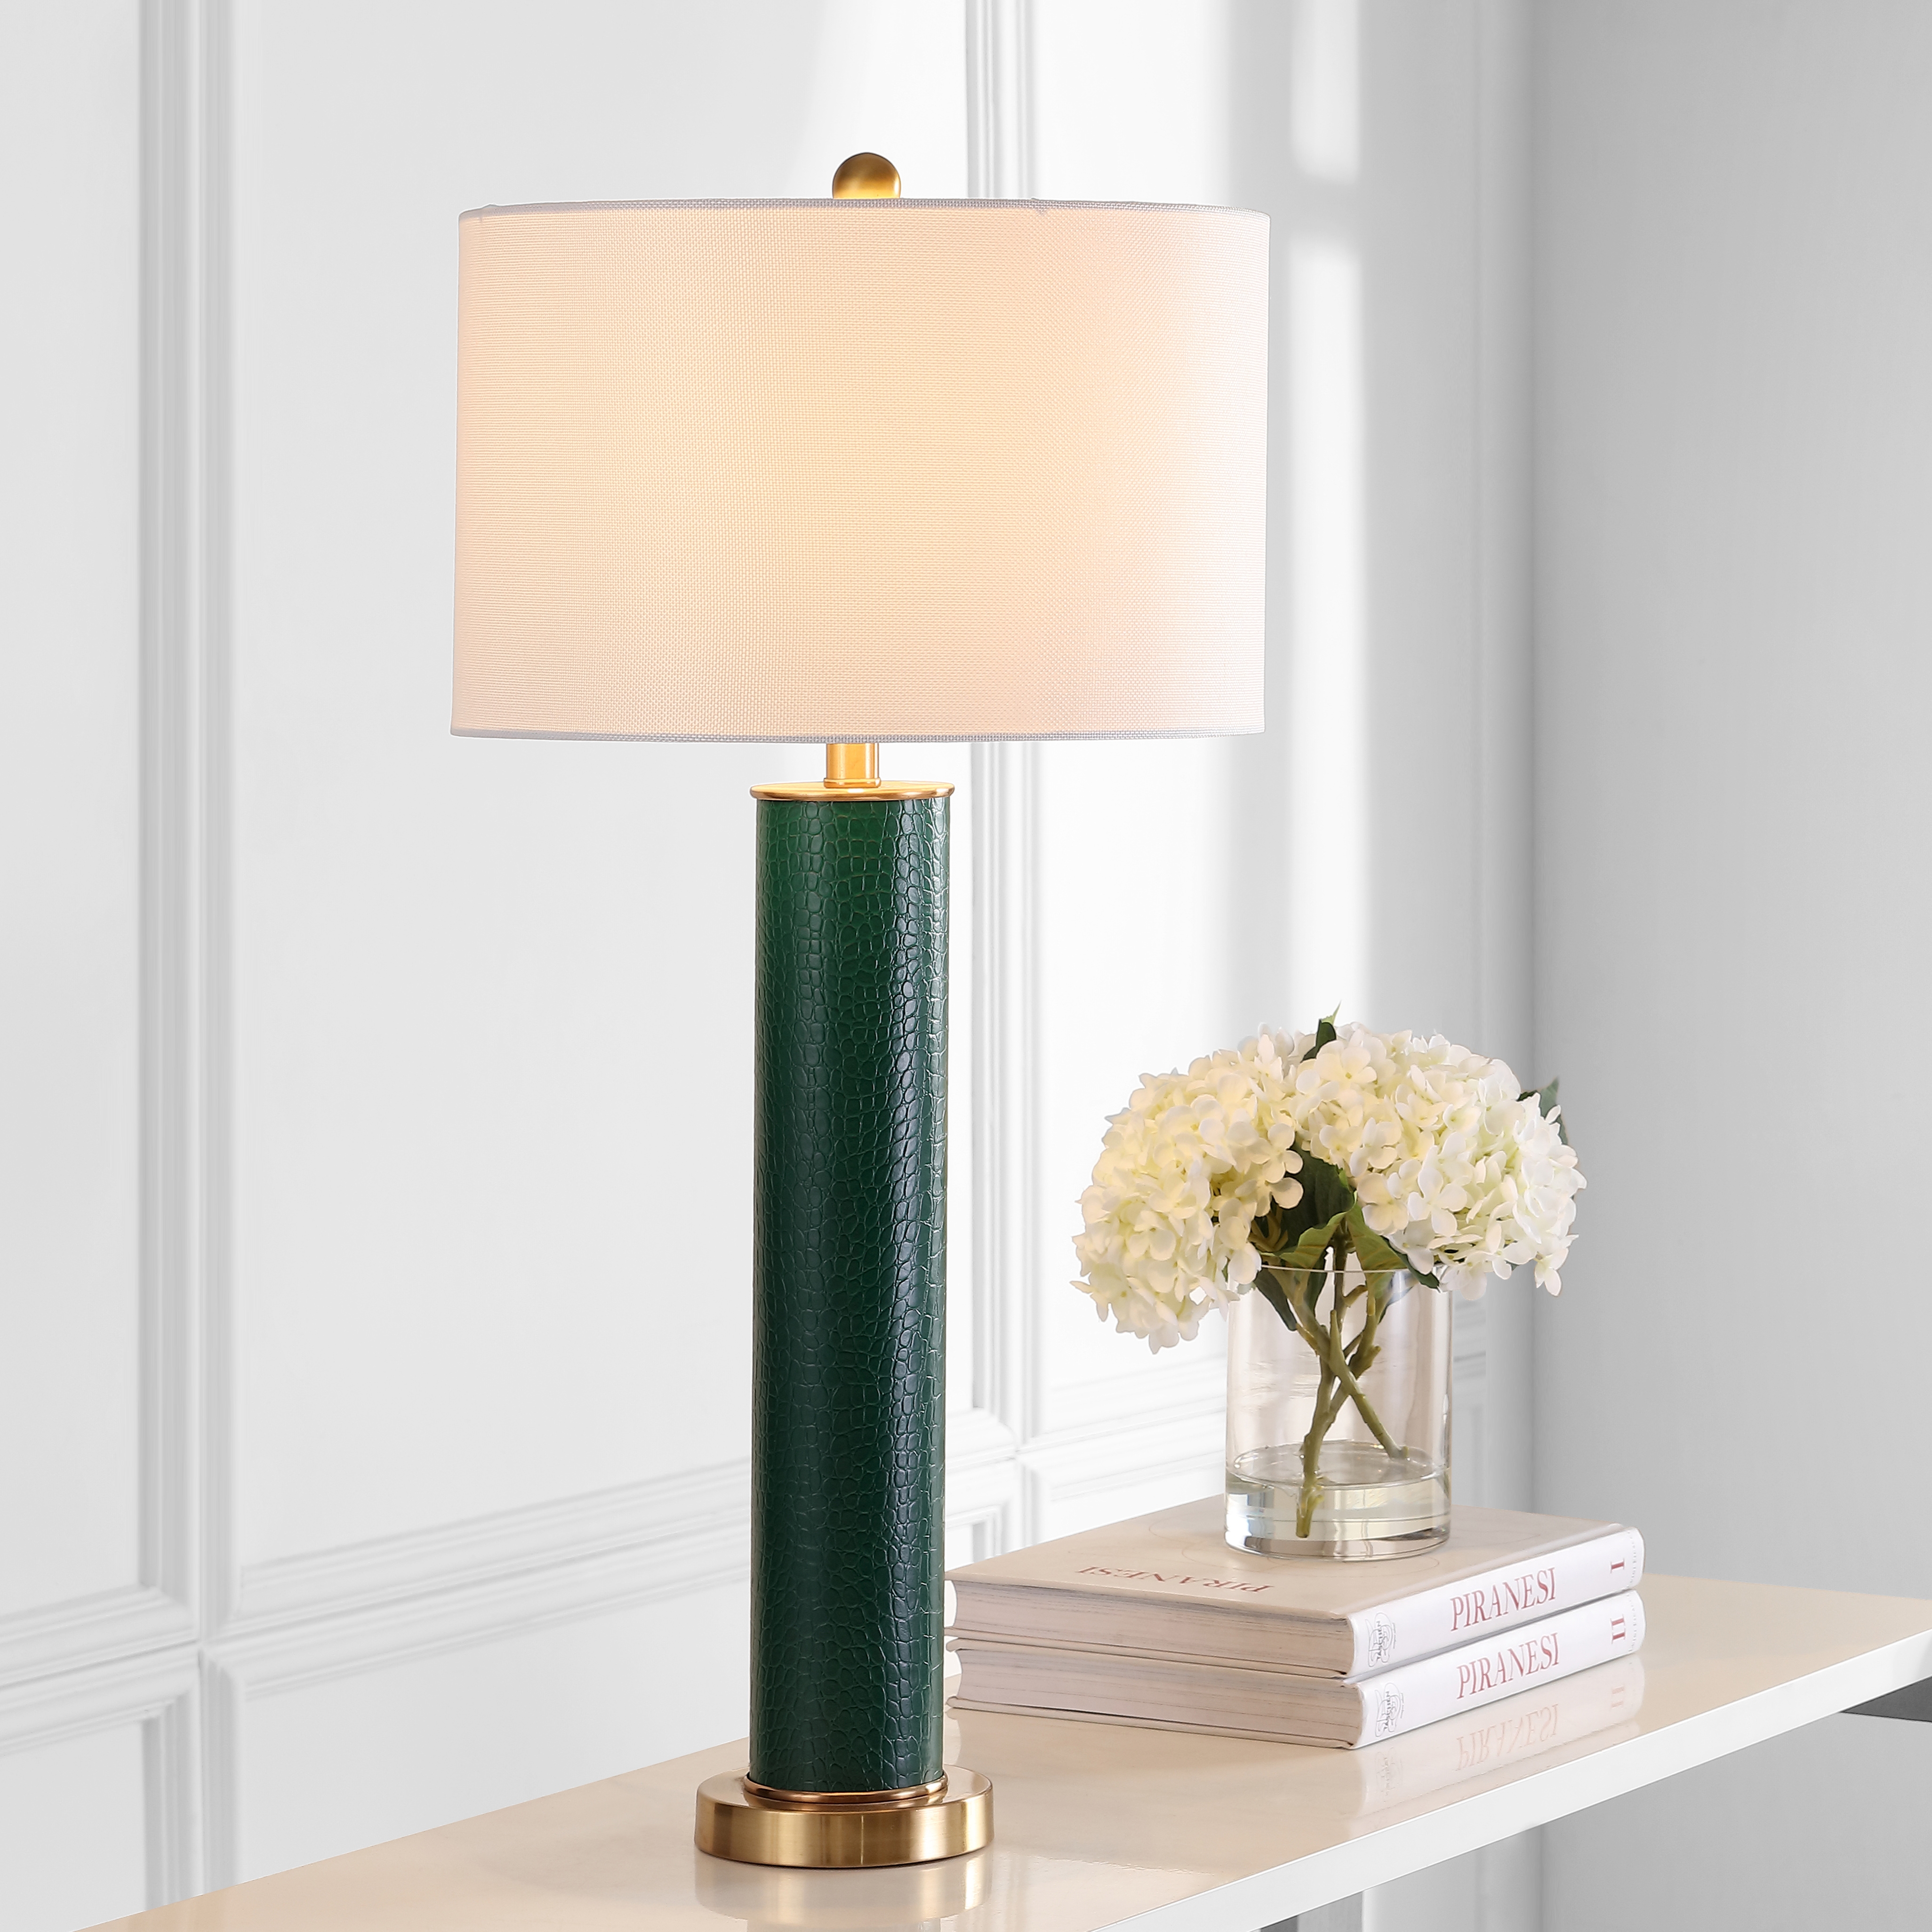 Ollie 31.5-Inch H Faux Alligator Table Lamp - Dark Green - Arlo Home - Image 5